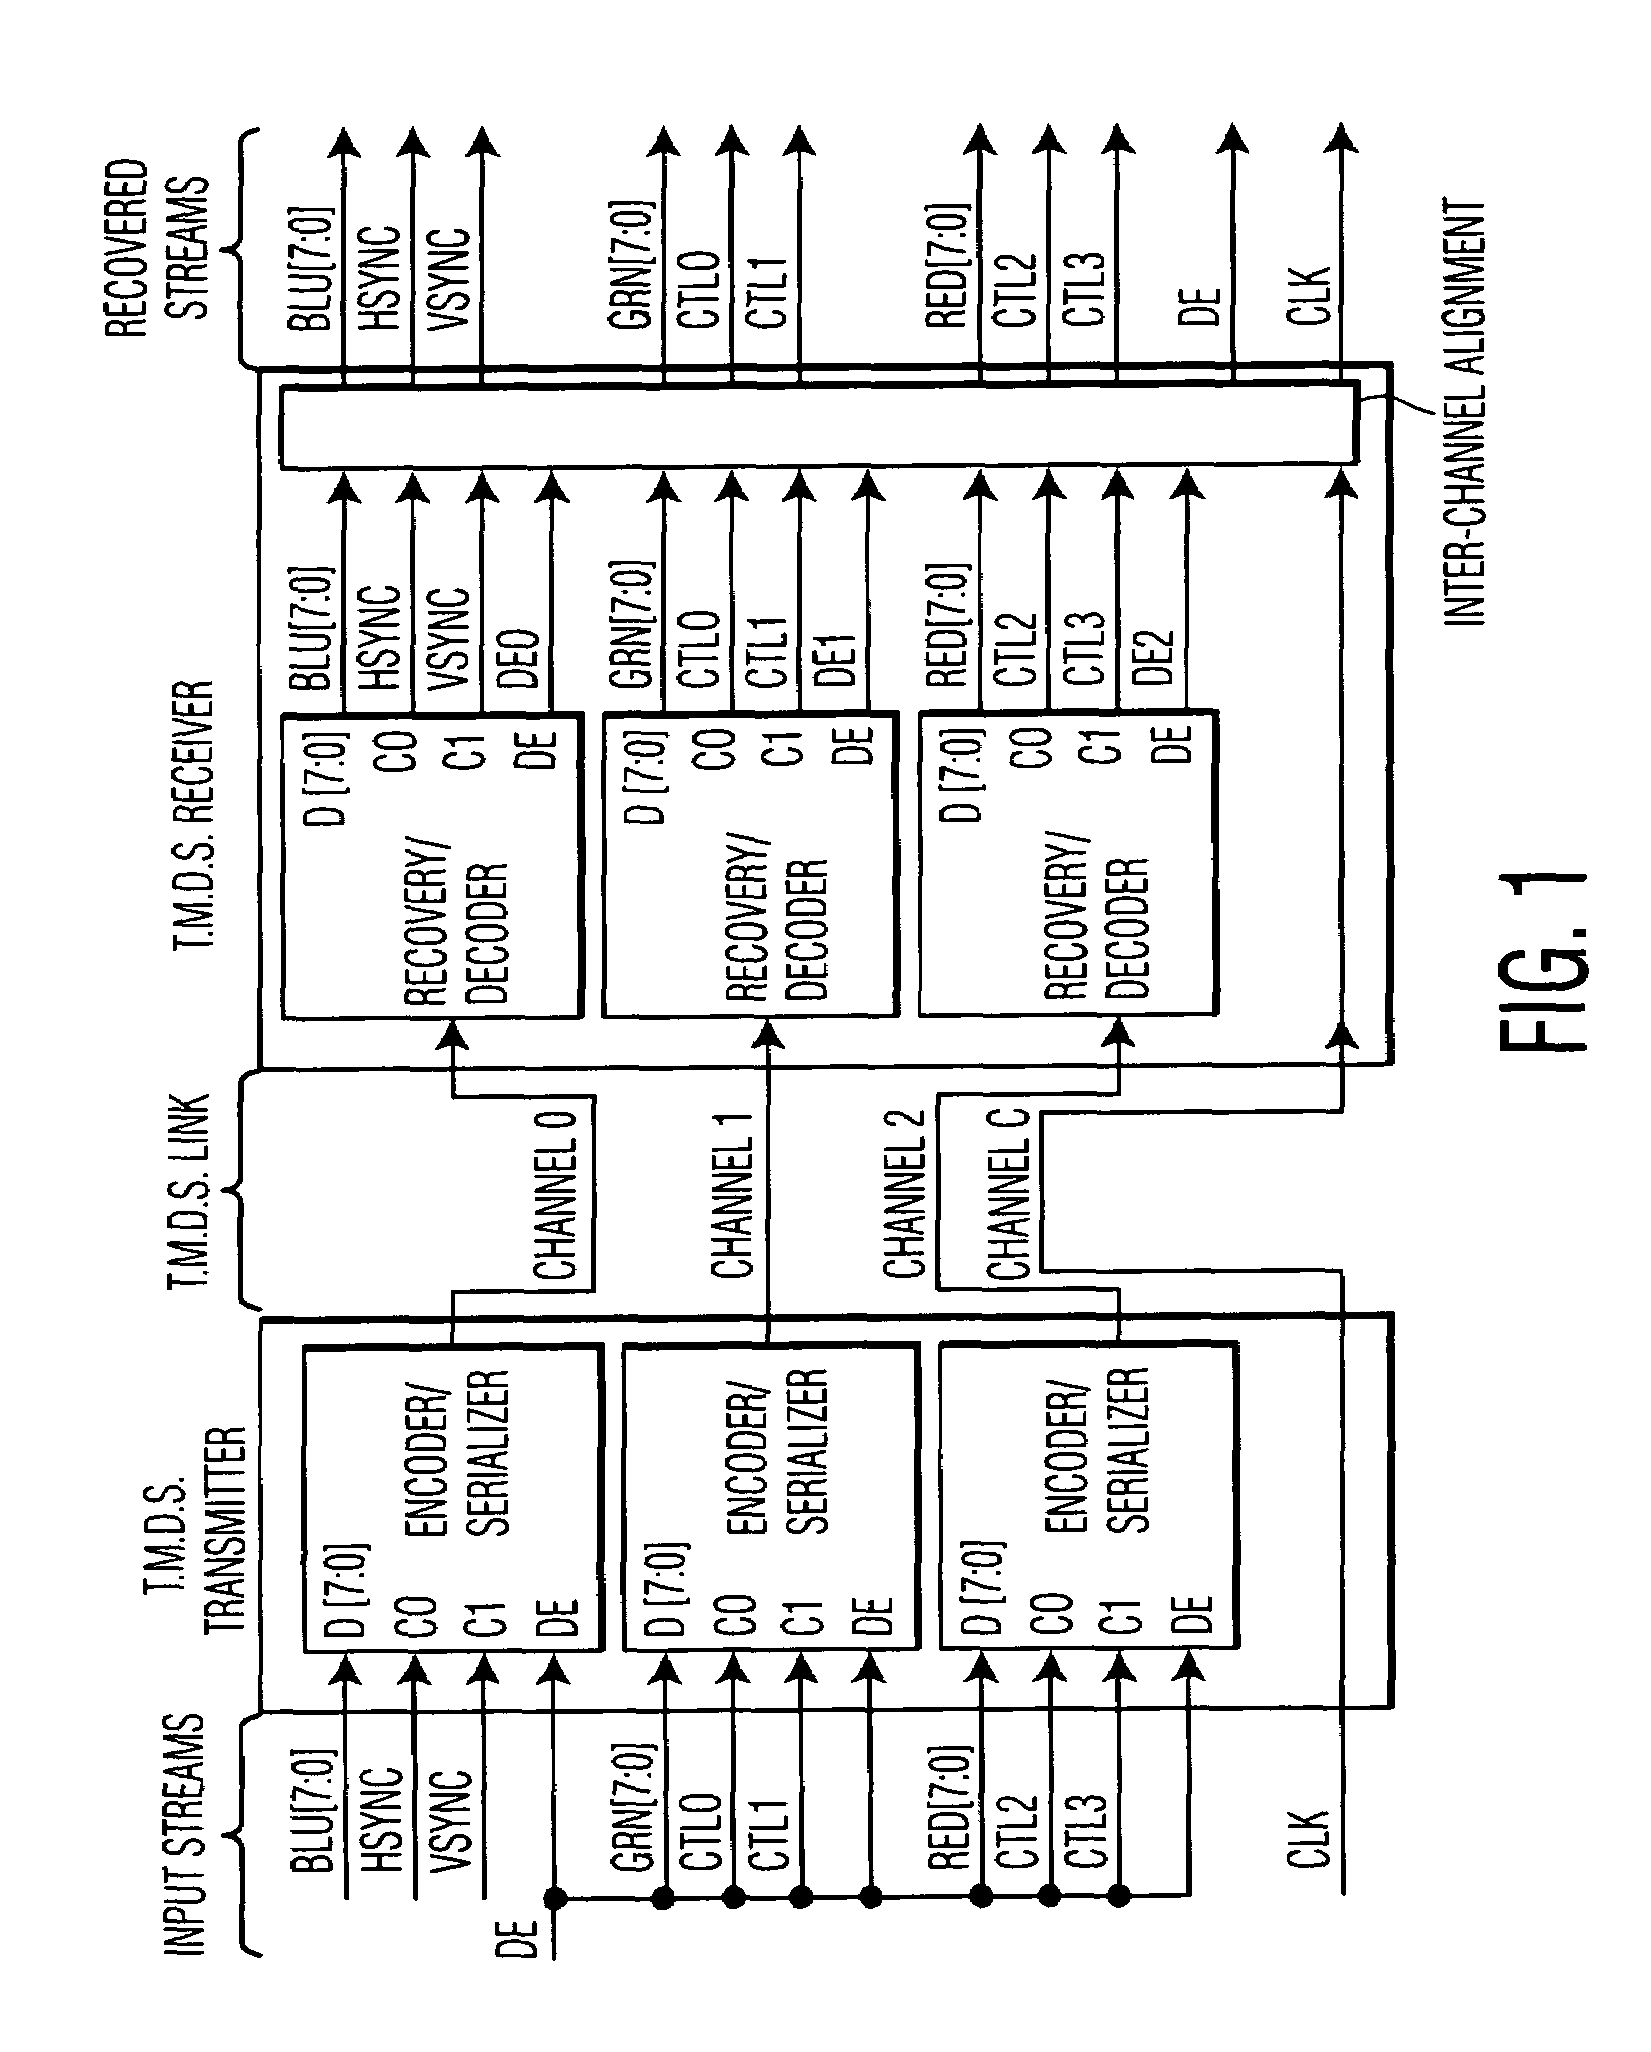 Systems and methods that identify normal traffic during network attacks